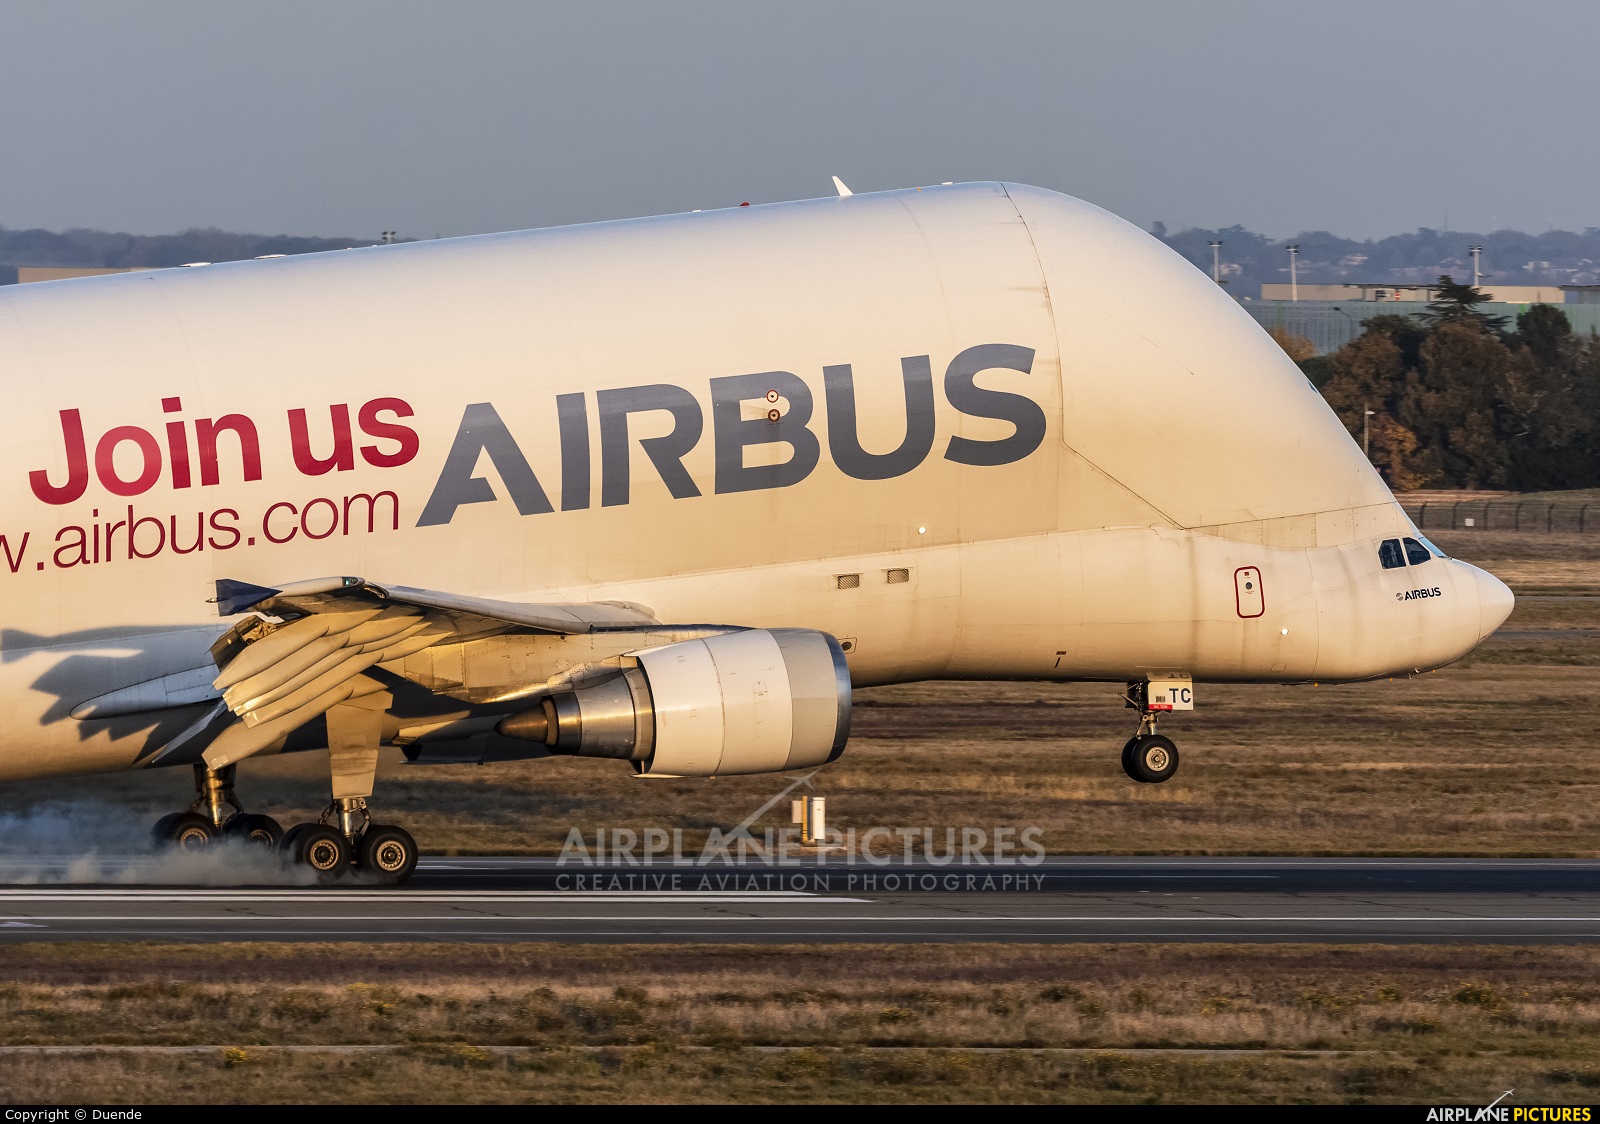 Airbus Industrie F-GSTC aircraft at Toulouse - Blagnac